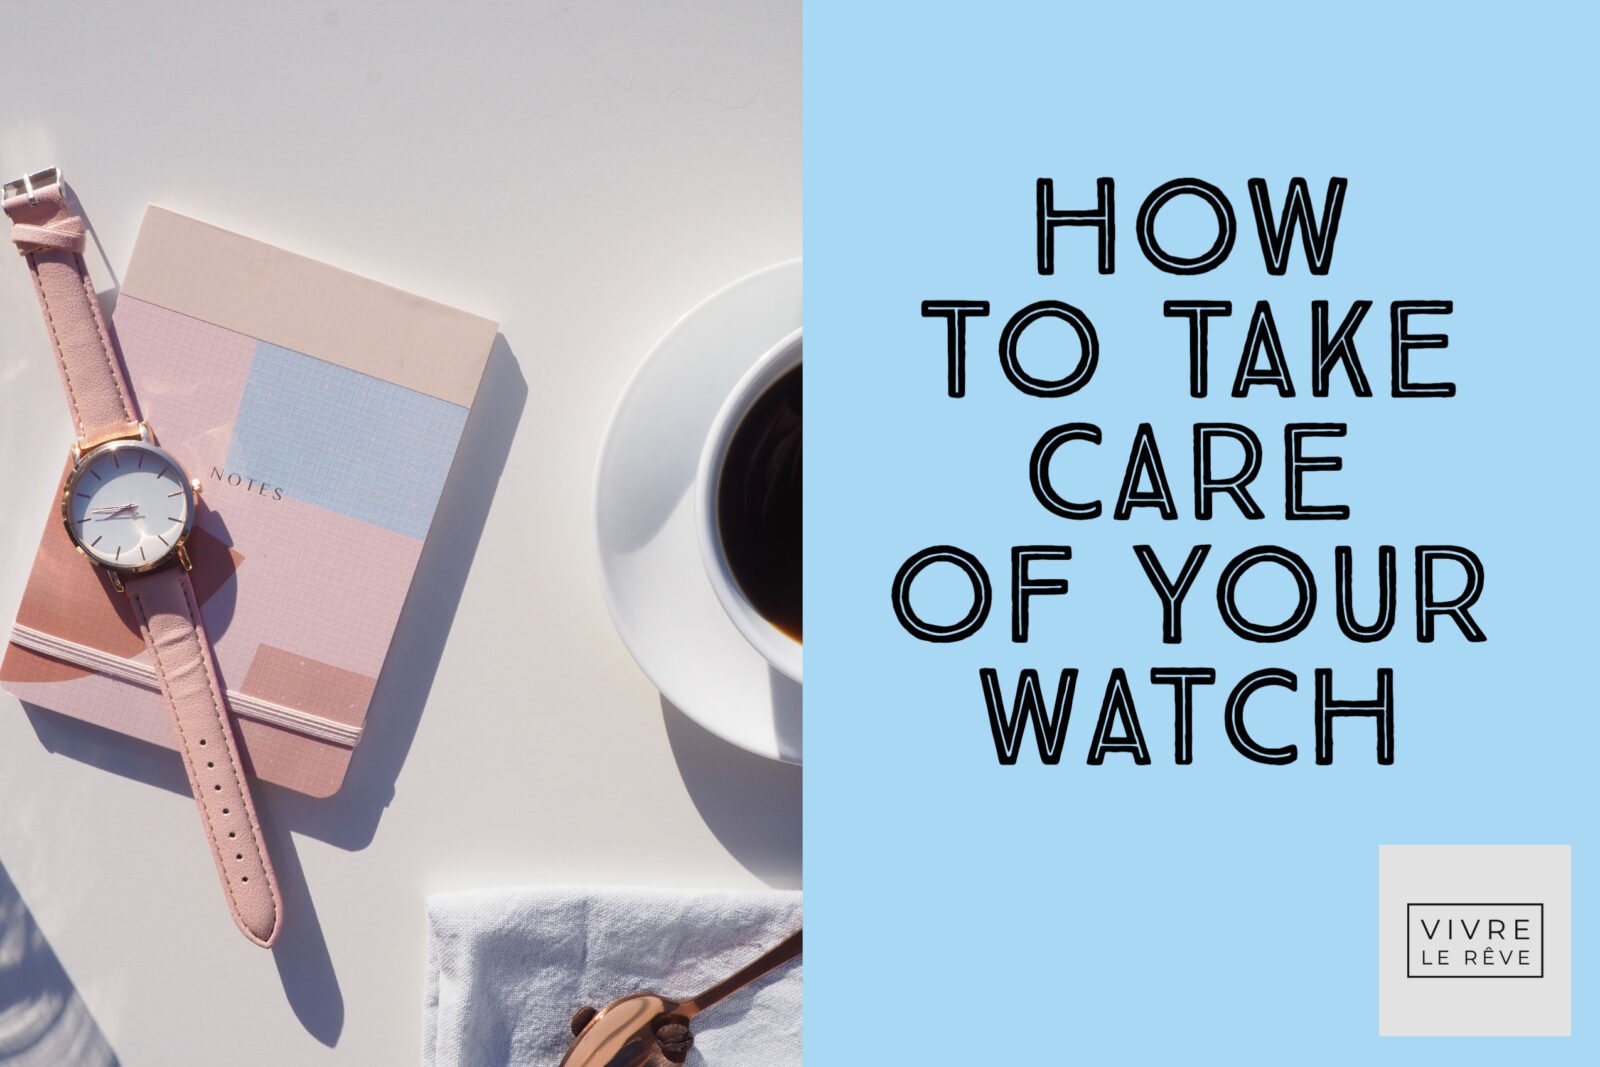 How To Take Care of Your Watch